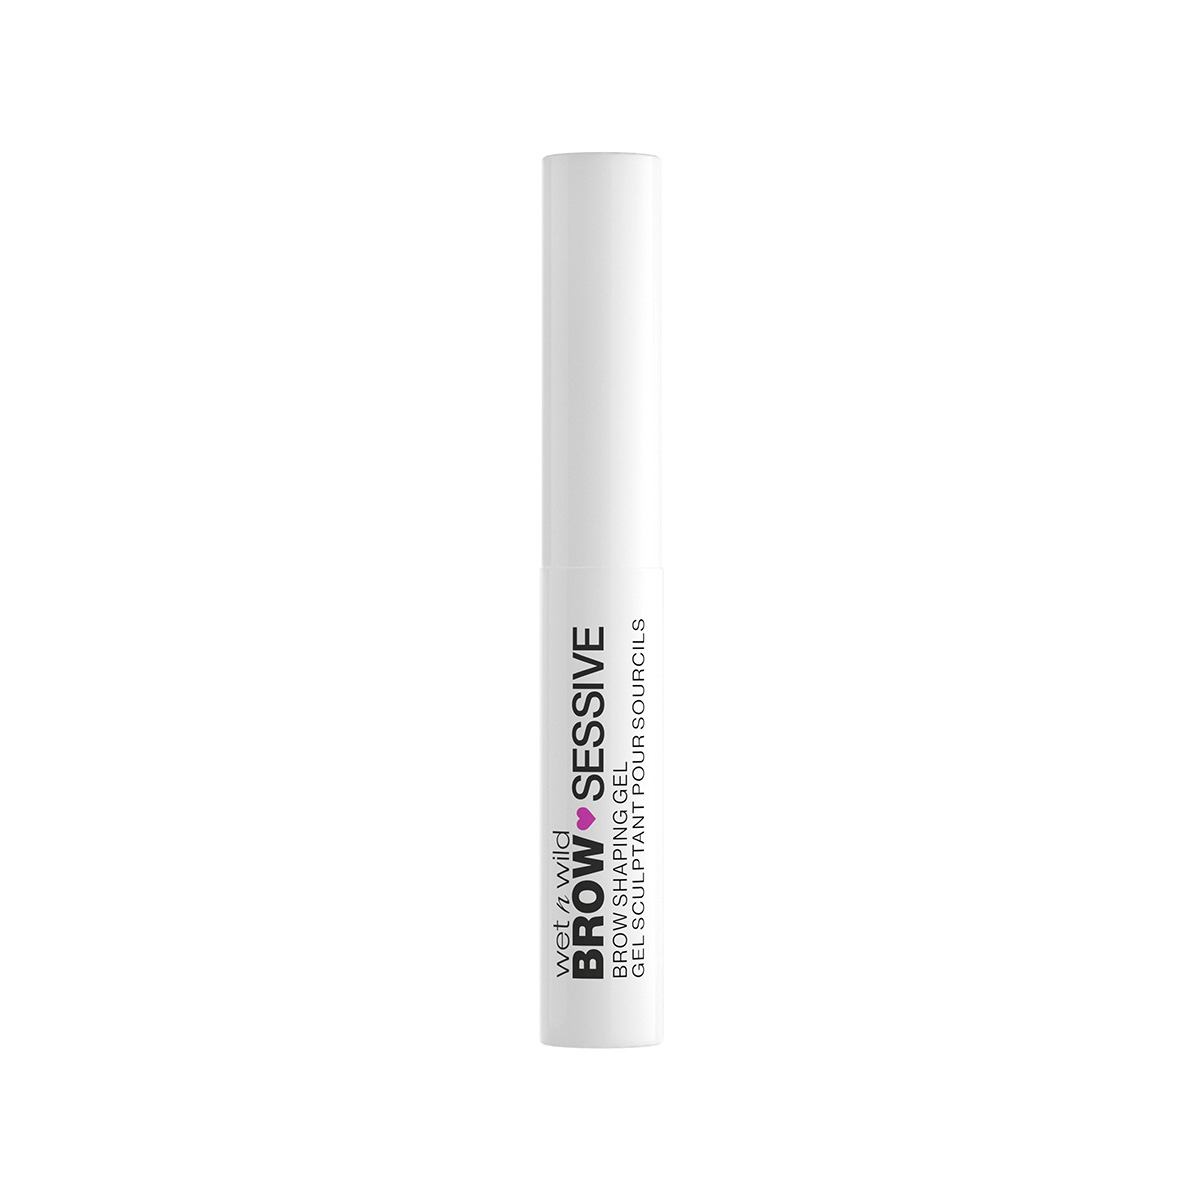 NEW! BROW-SESSIVE BROW SHAPING GEL Blonde